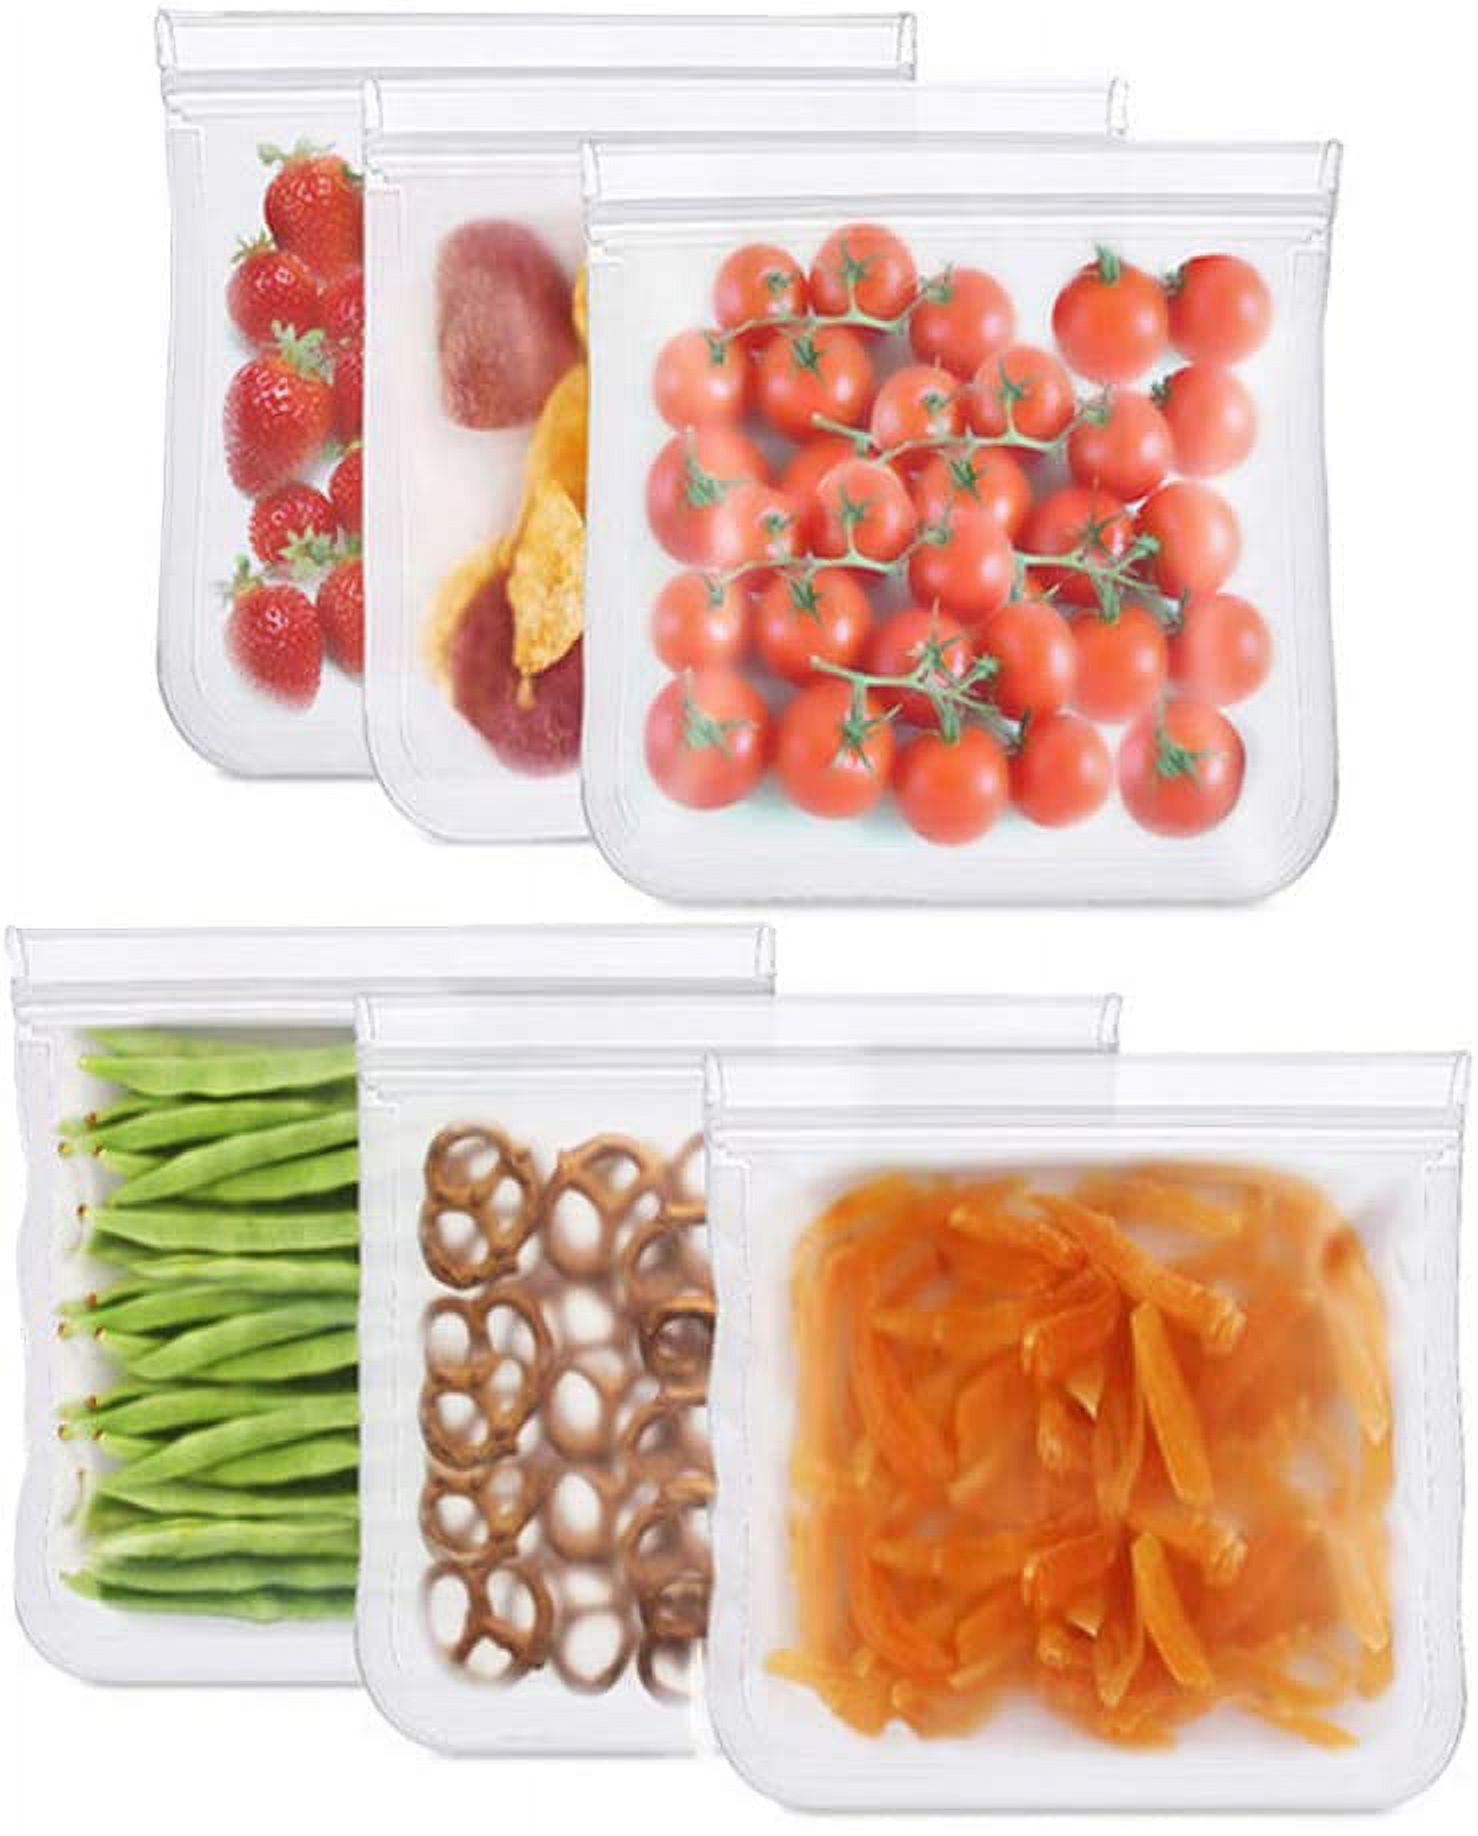 Reusable Silicone Food Storage Bags, 6Pack Reusable Gallon Bags Seal & Leak Proof, BPA Free Reusable Freezer Bags for Kids Travel, Marinate Meats